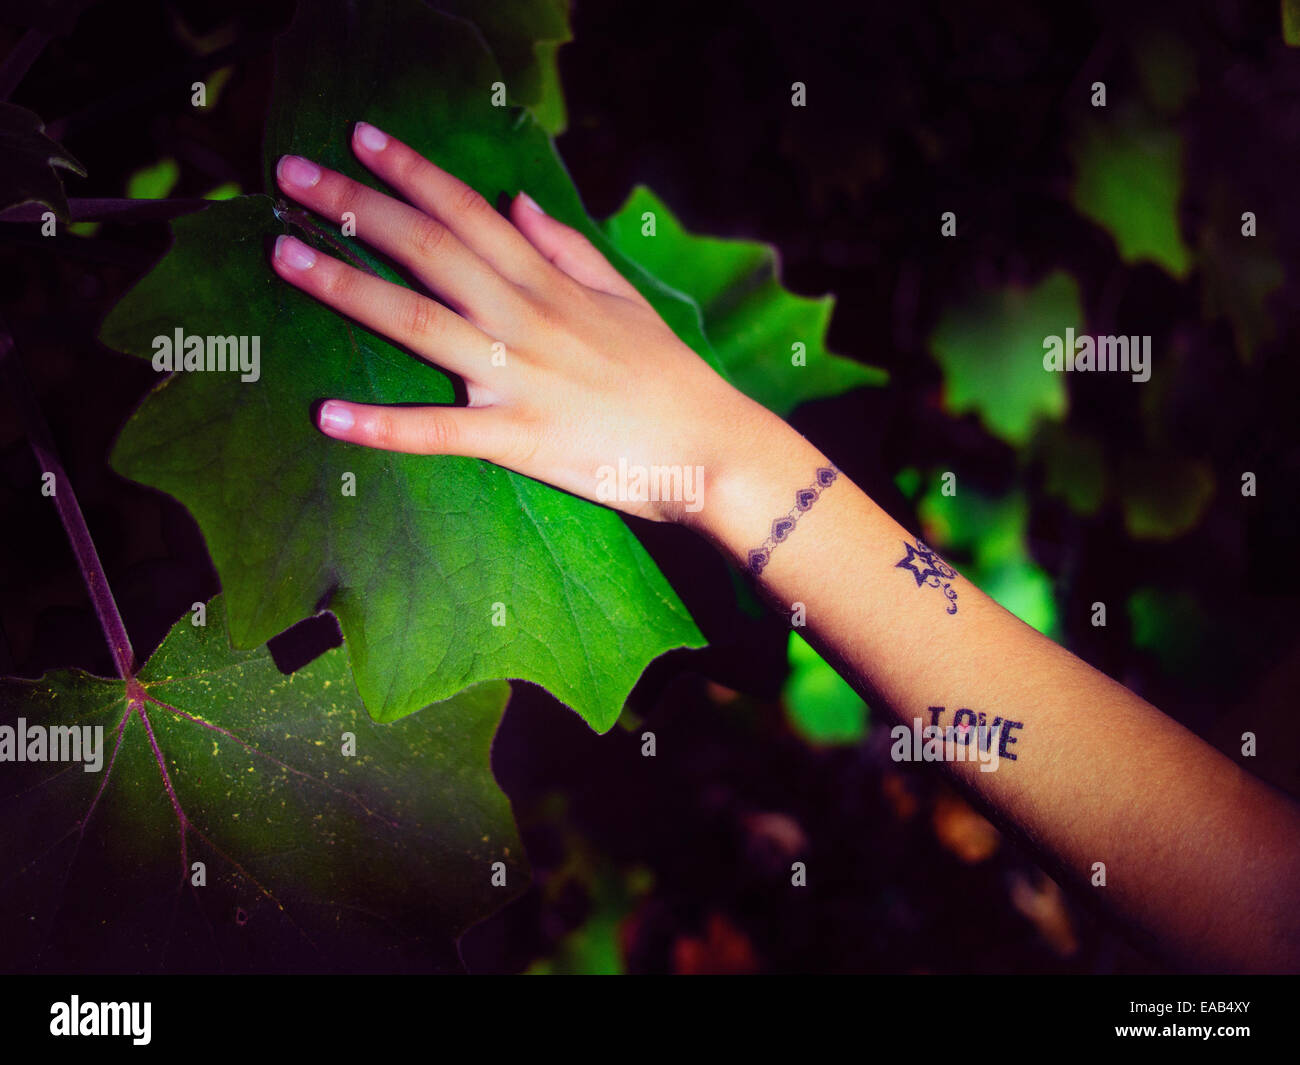 Girl with temporary tattoo places hand on leaf Stock Photo